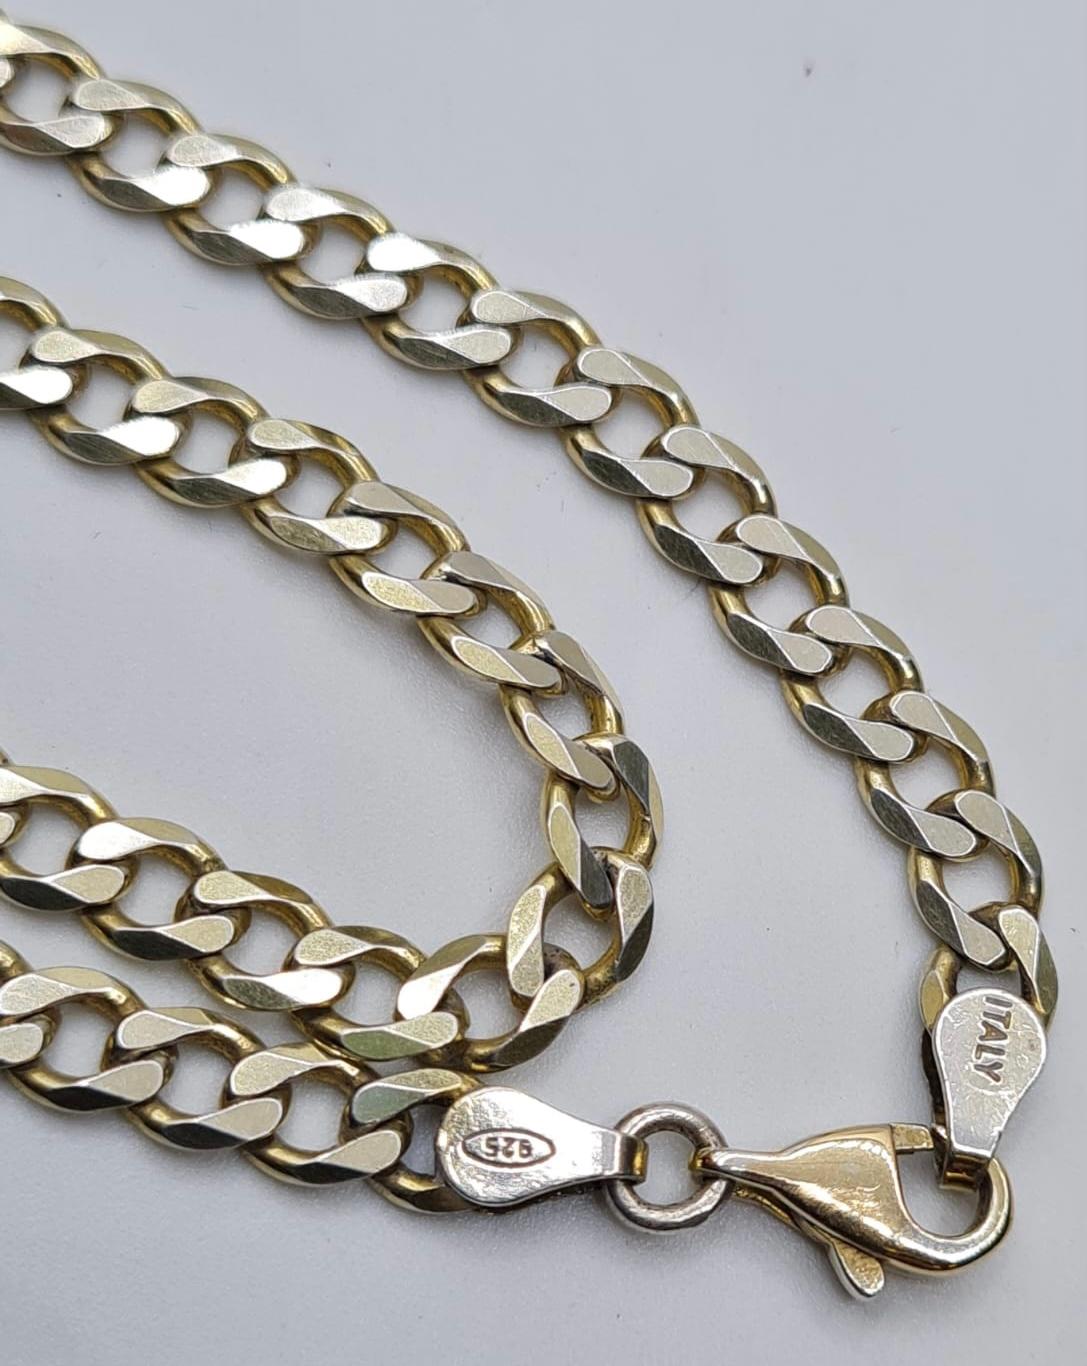 A Quality Silver Curb Link Chain Necklace, 48cm Long Approx. Stamped Italy 925 Silver. - Image 2 of 2